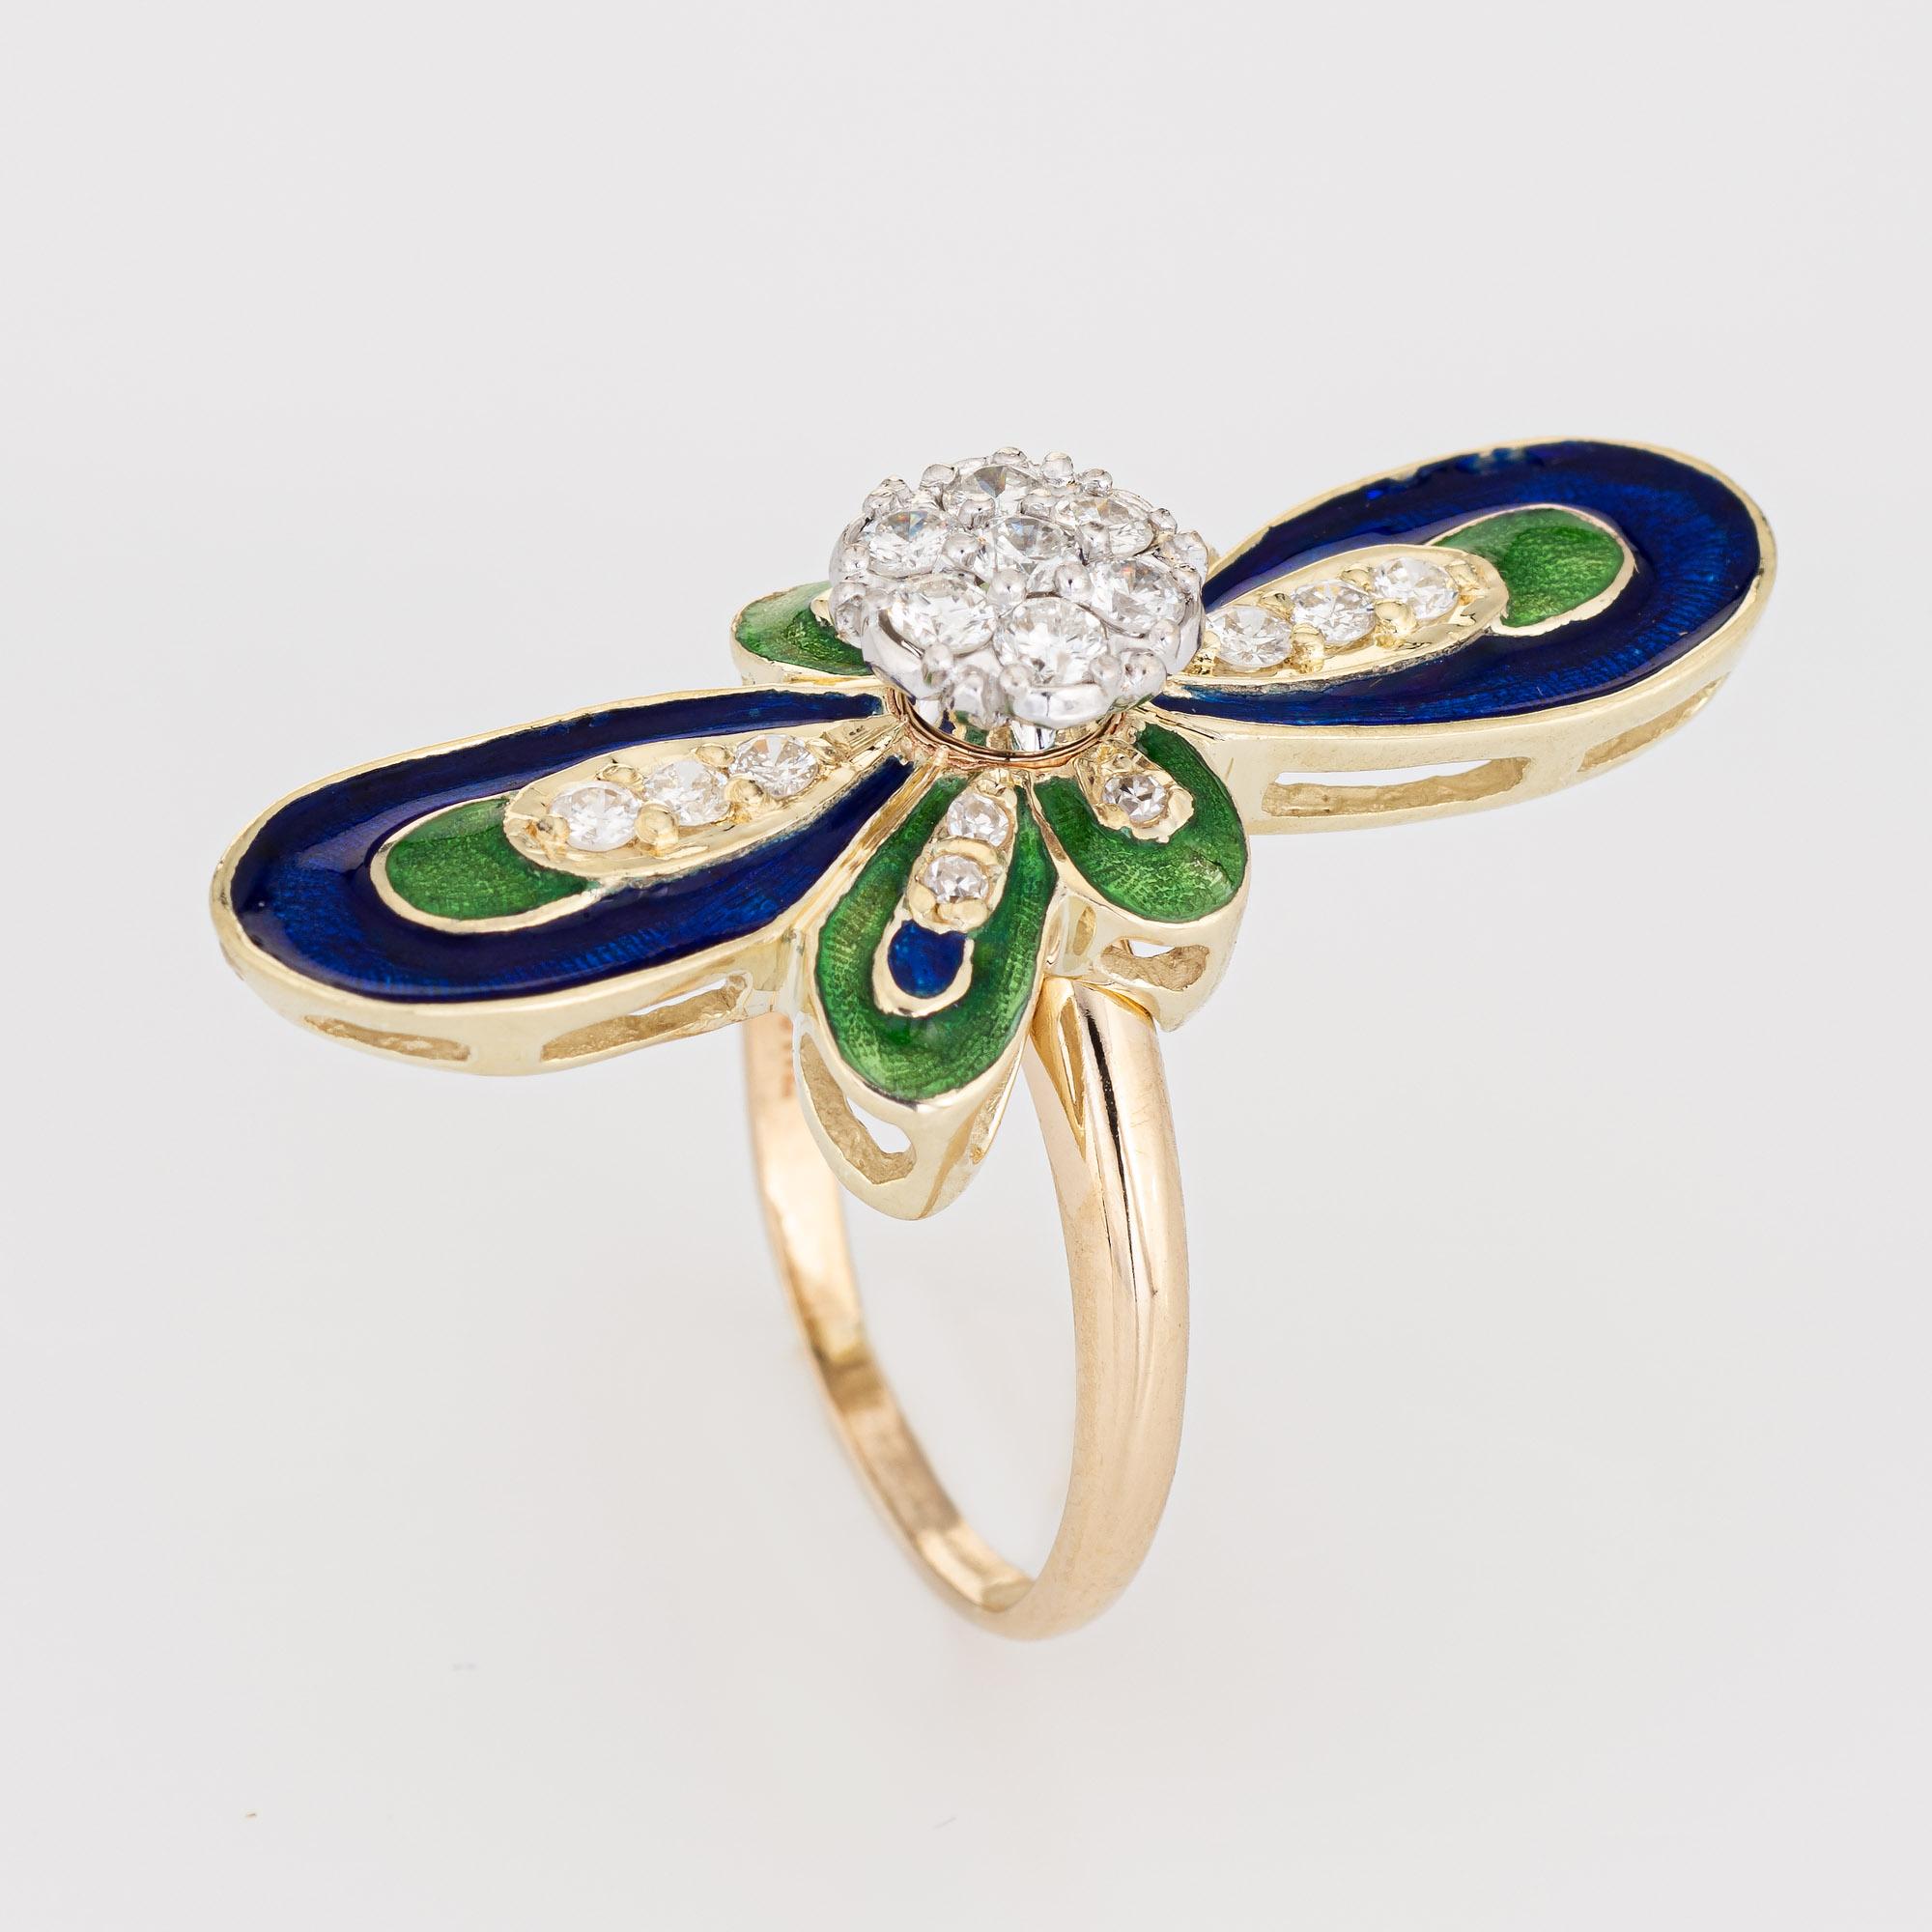 Stylish vintage diamond & enamel ring (circa 1960s) crafted in 14 karat yellow gold. 

Round brilliant cut diamonds total an estimated 0.45 carats (estimated at I-J color and VS2-SI2 clarity). 

The bold and groovy ring highlights bright and lively